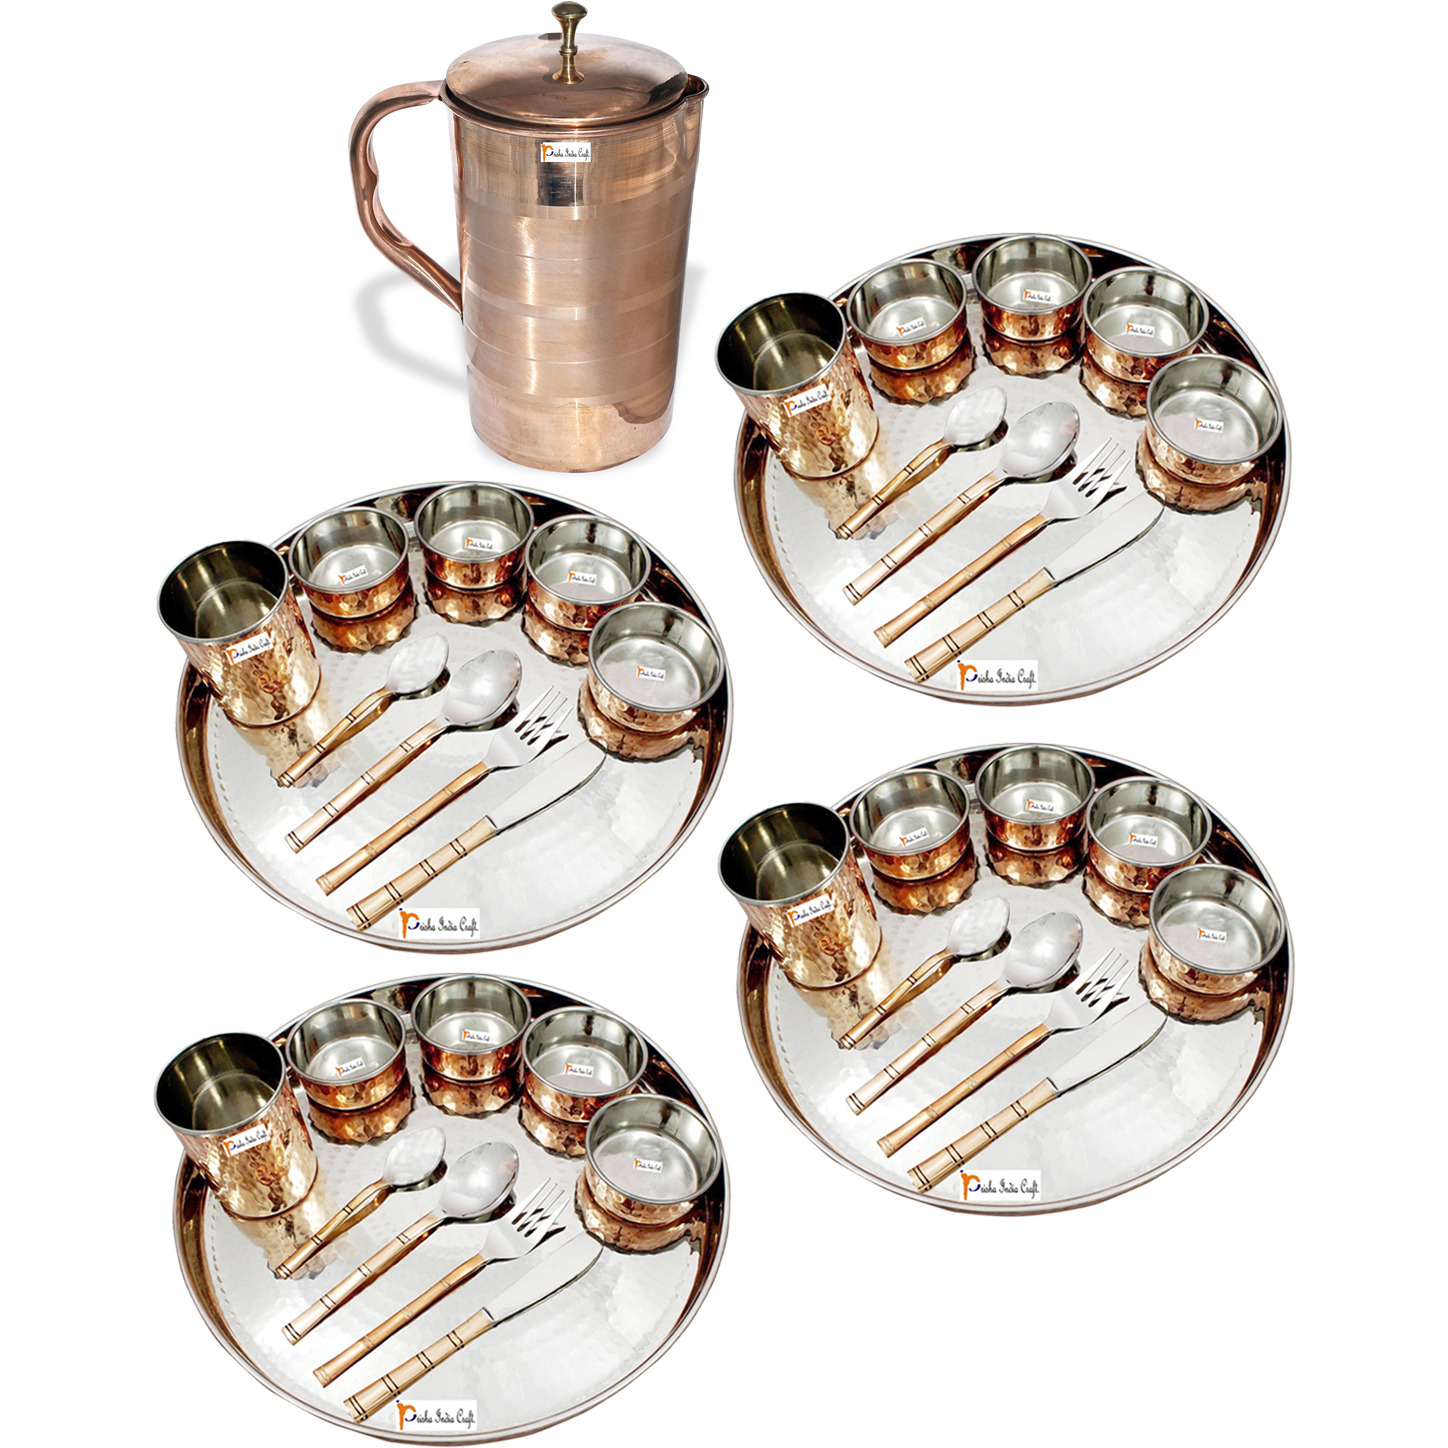 Prisha India Craft B. Set of 4 Dinnerware Traditional Stainless Steel Copper Dinner Set of Thali Plate, Bowls, Glass and Spoons, Dia 13  With 1 Luxury Style Pure Copper Pitcher Jug - Christmas Gift